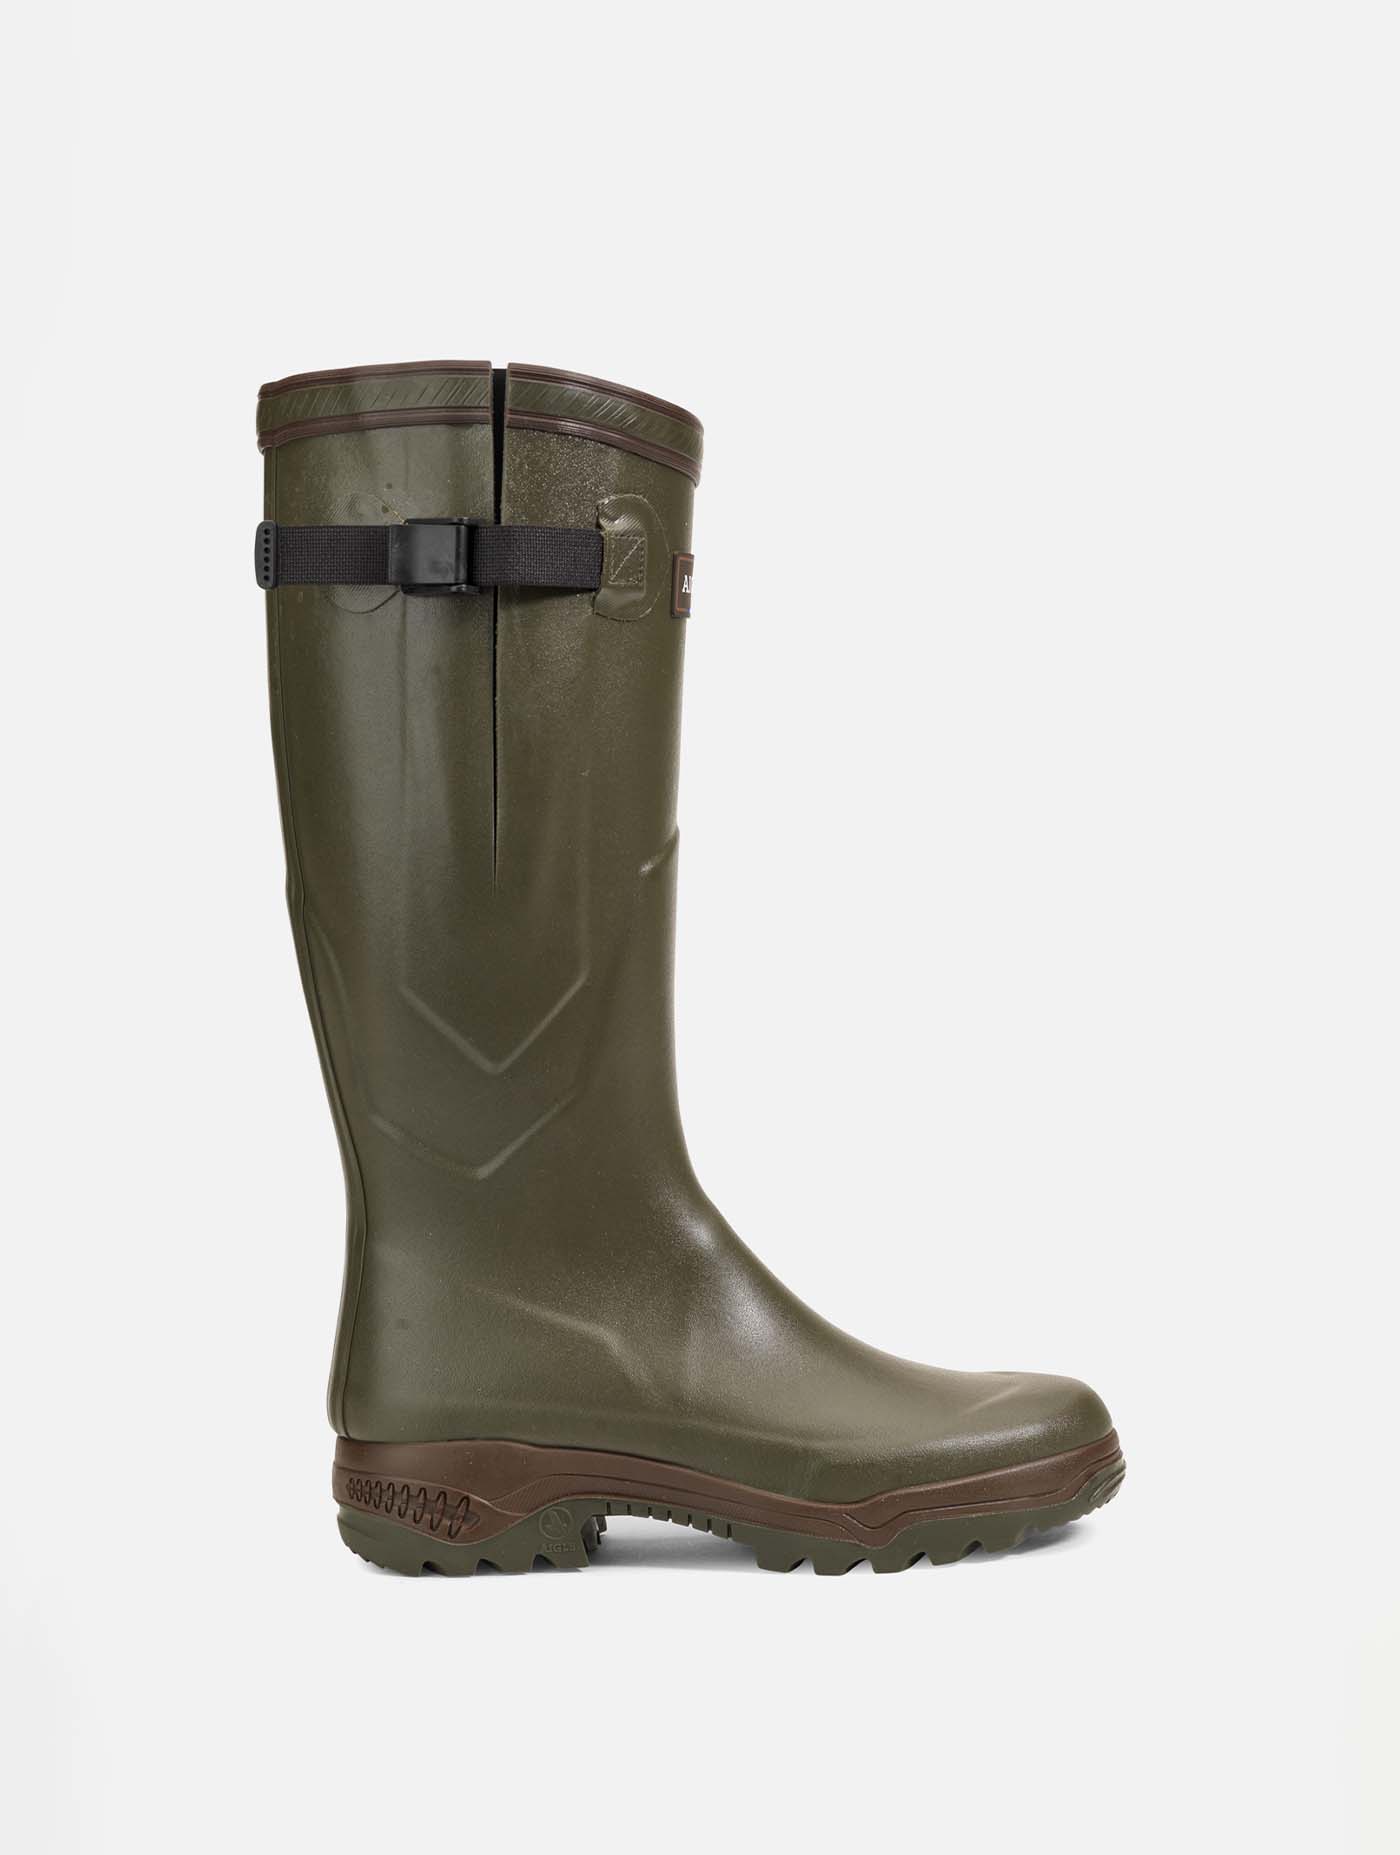 andrageren Fremmedgøre katastrofe Aigle - Adjustable anti-fatigue boots, Made in France Bronze - Parcours® 2  variomen | AIGLE